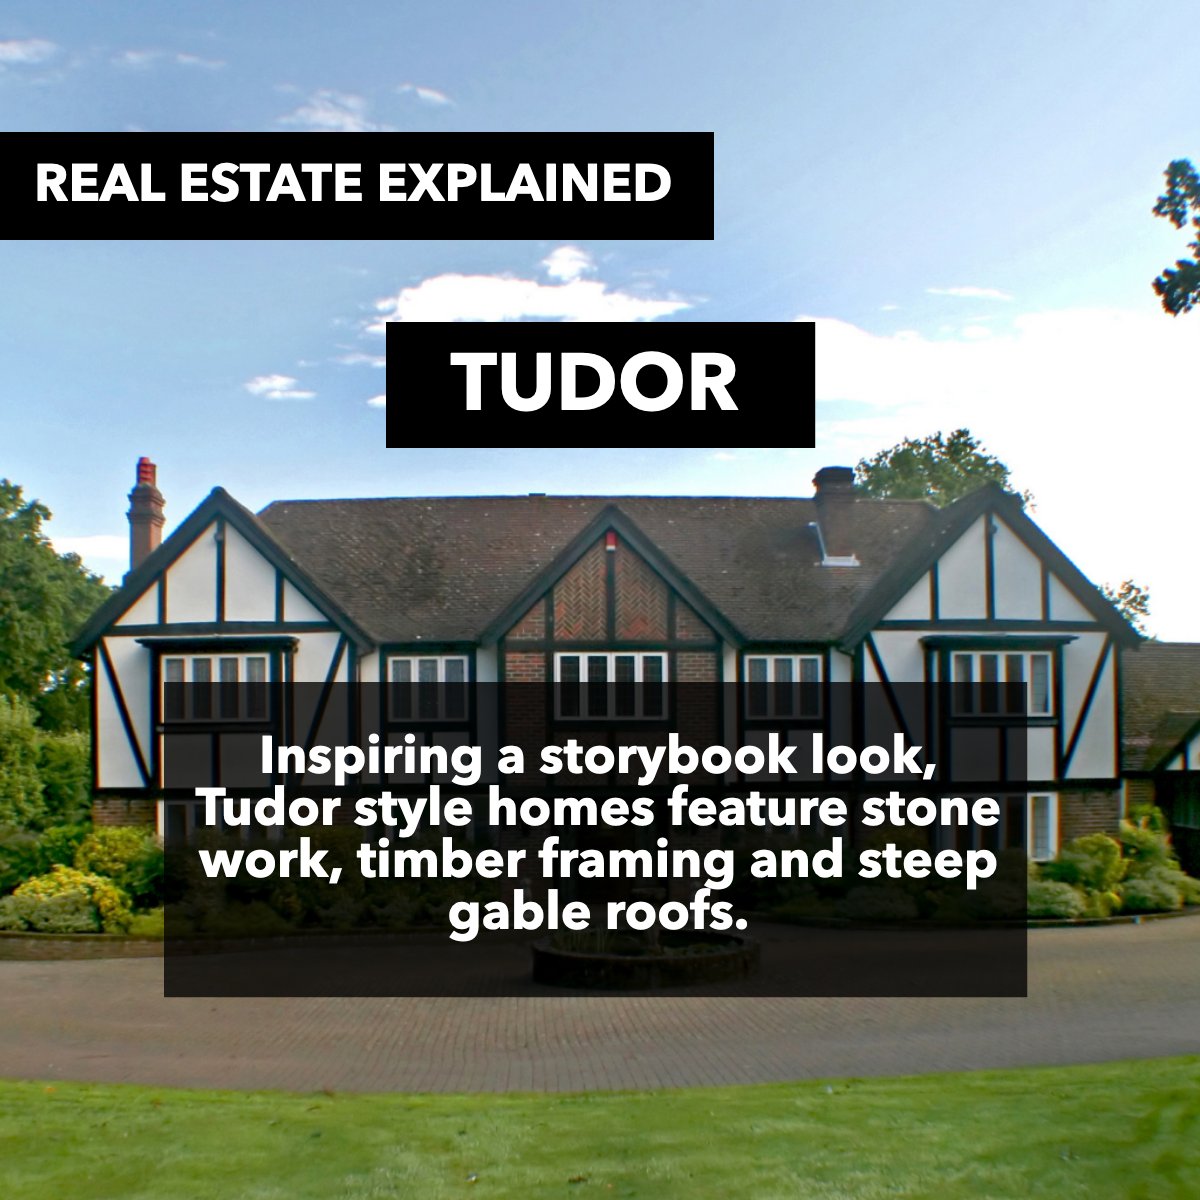 Charming, intricate, and classic, they have been an iconic home style in North America since the 19th century. 🏘️

#tudorstylearchitecture   #tudorstylehome   #styletudors
#Lifelong